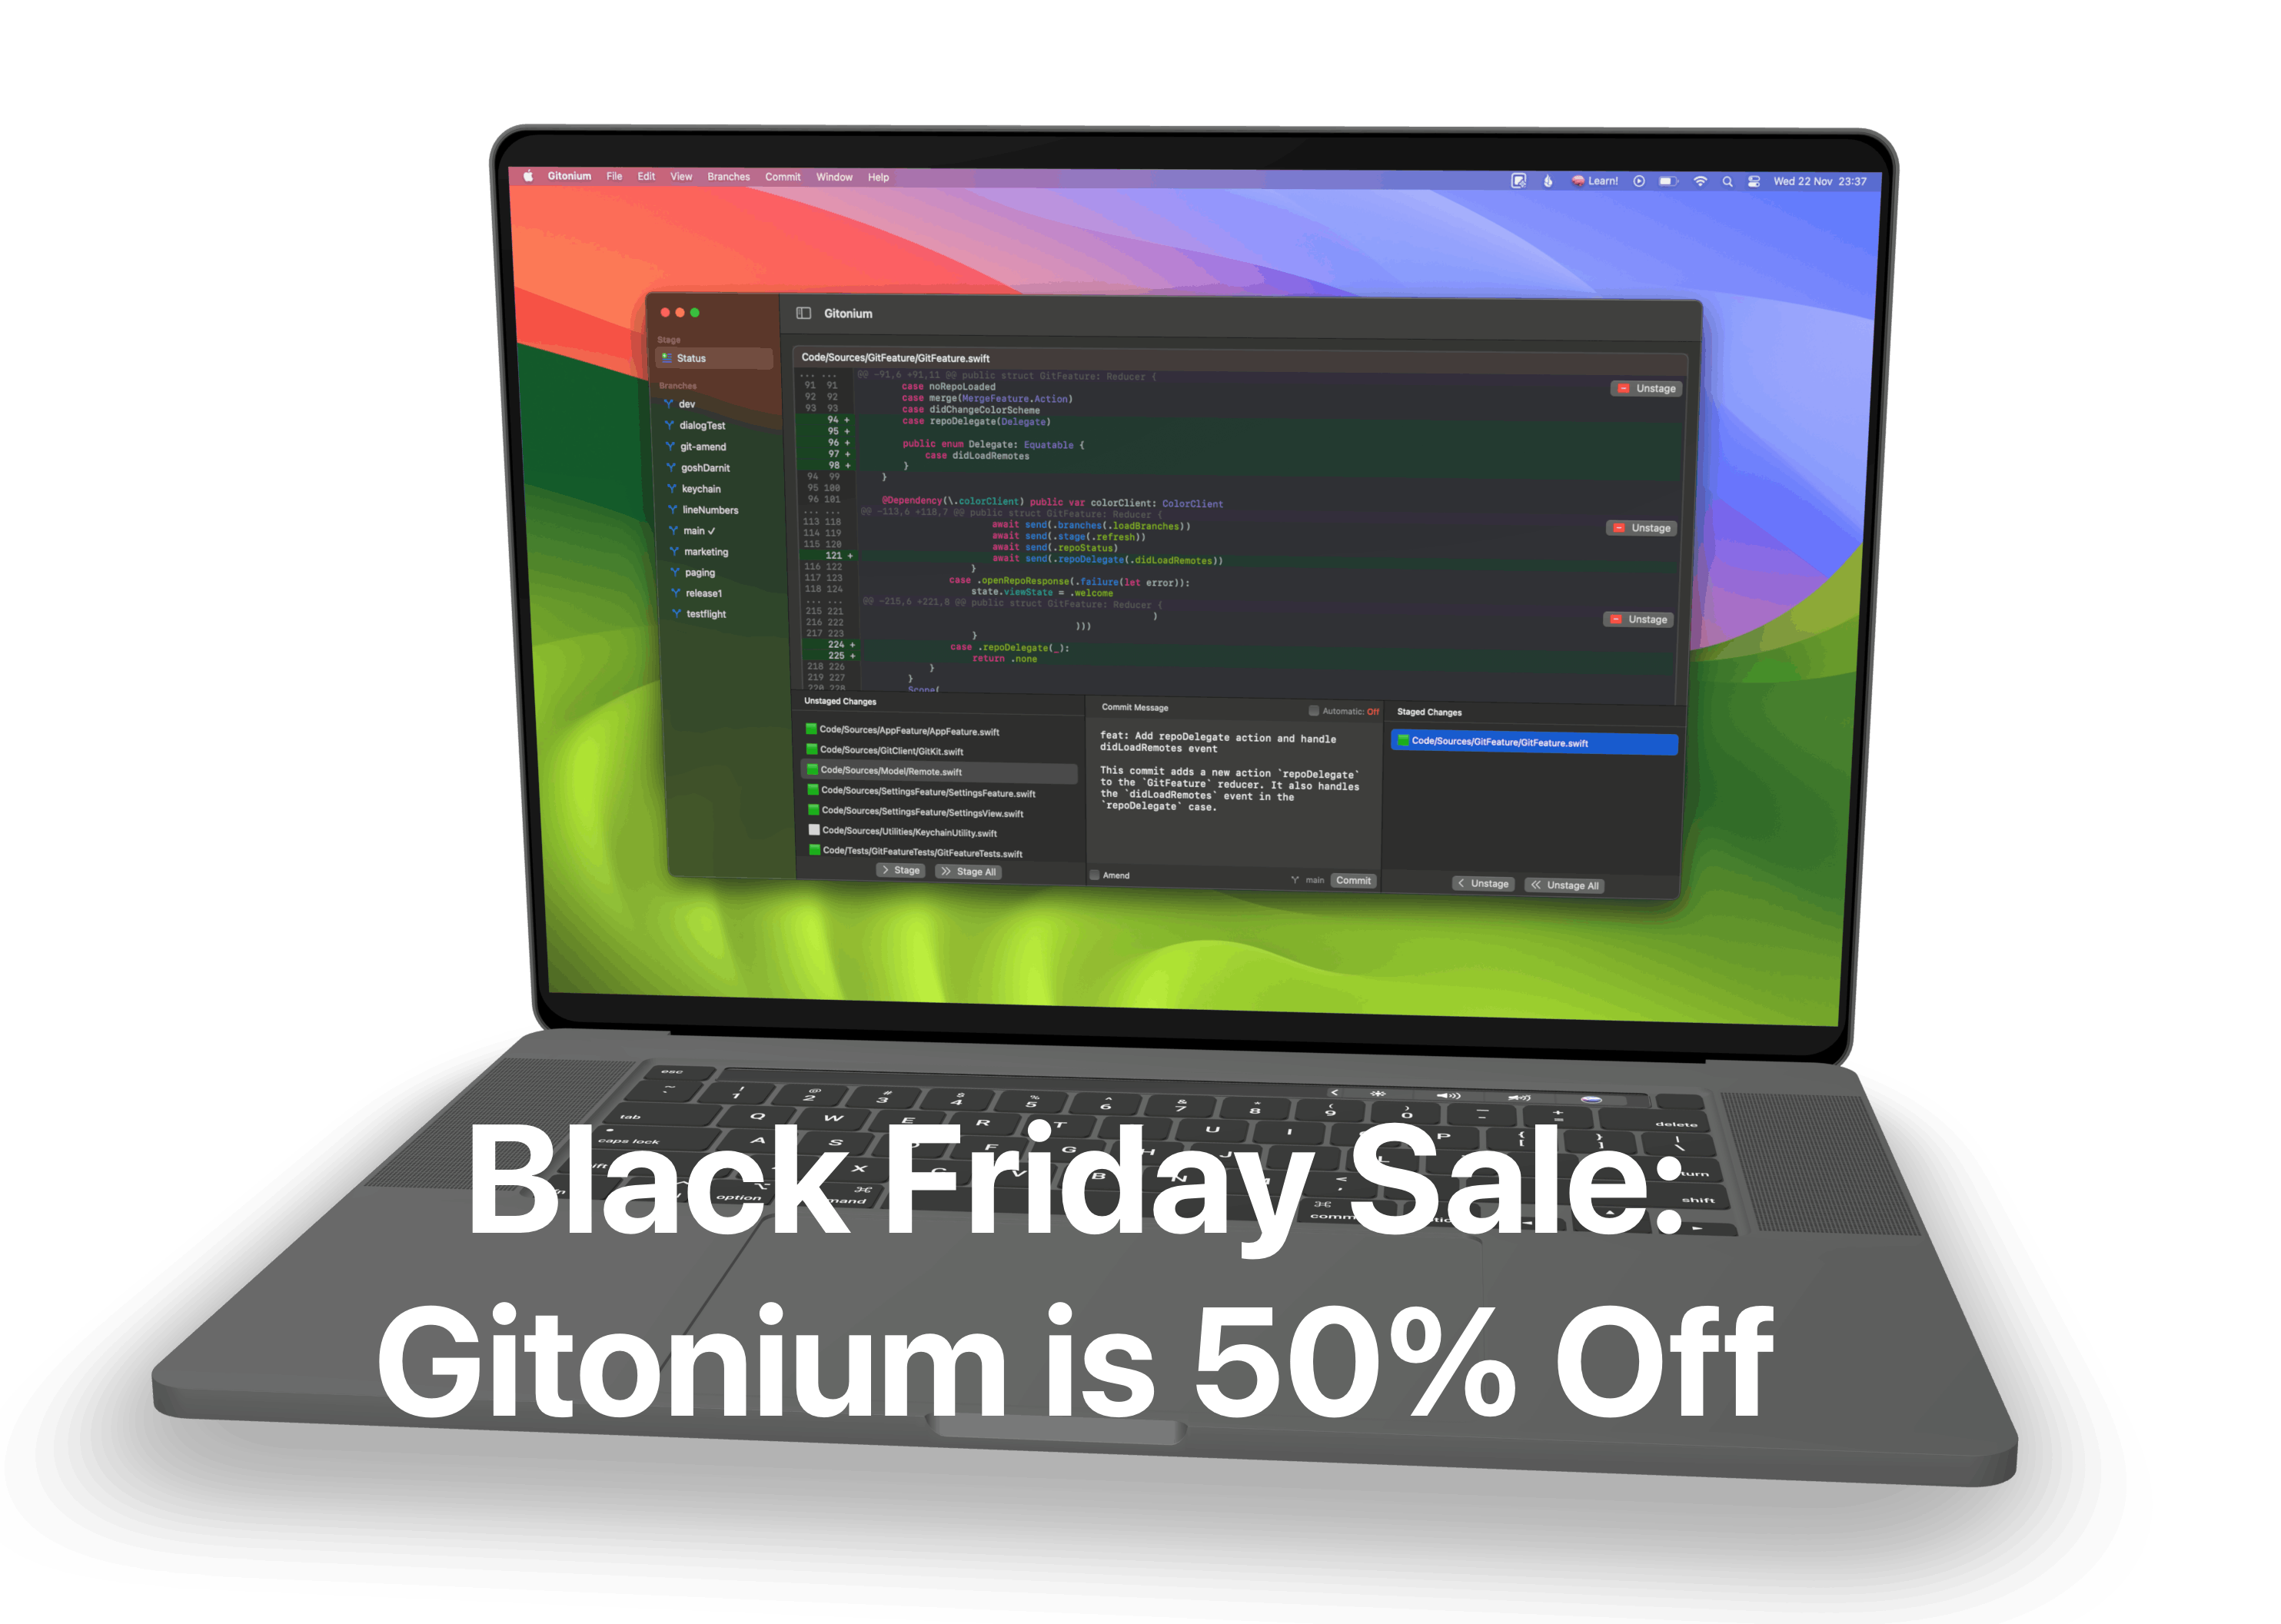 Gitonium is 50% off for Black Friday